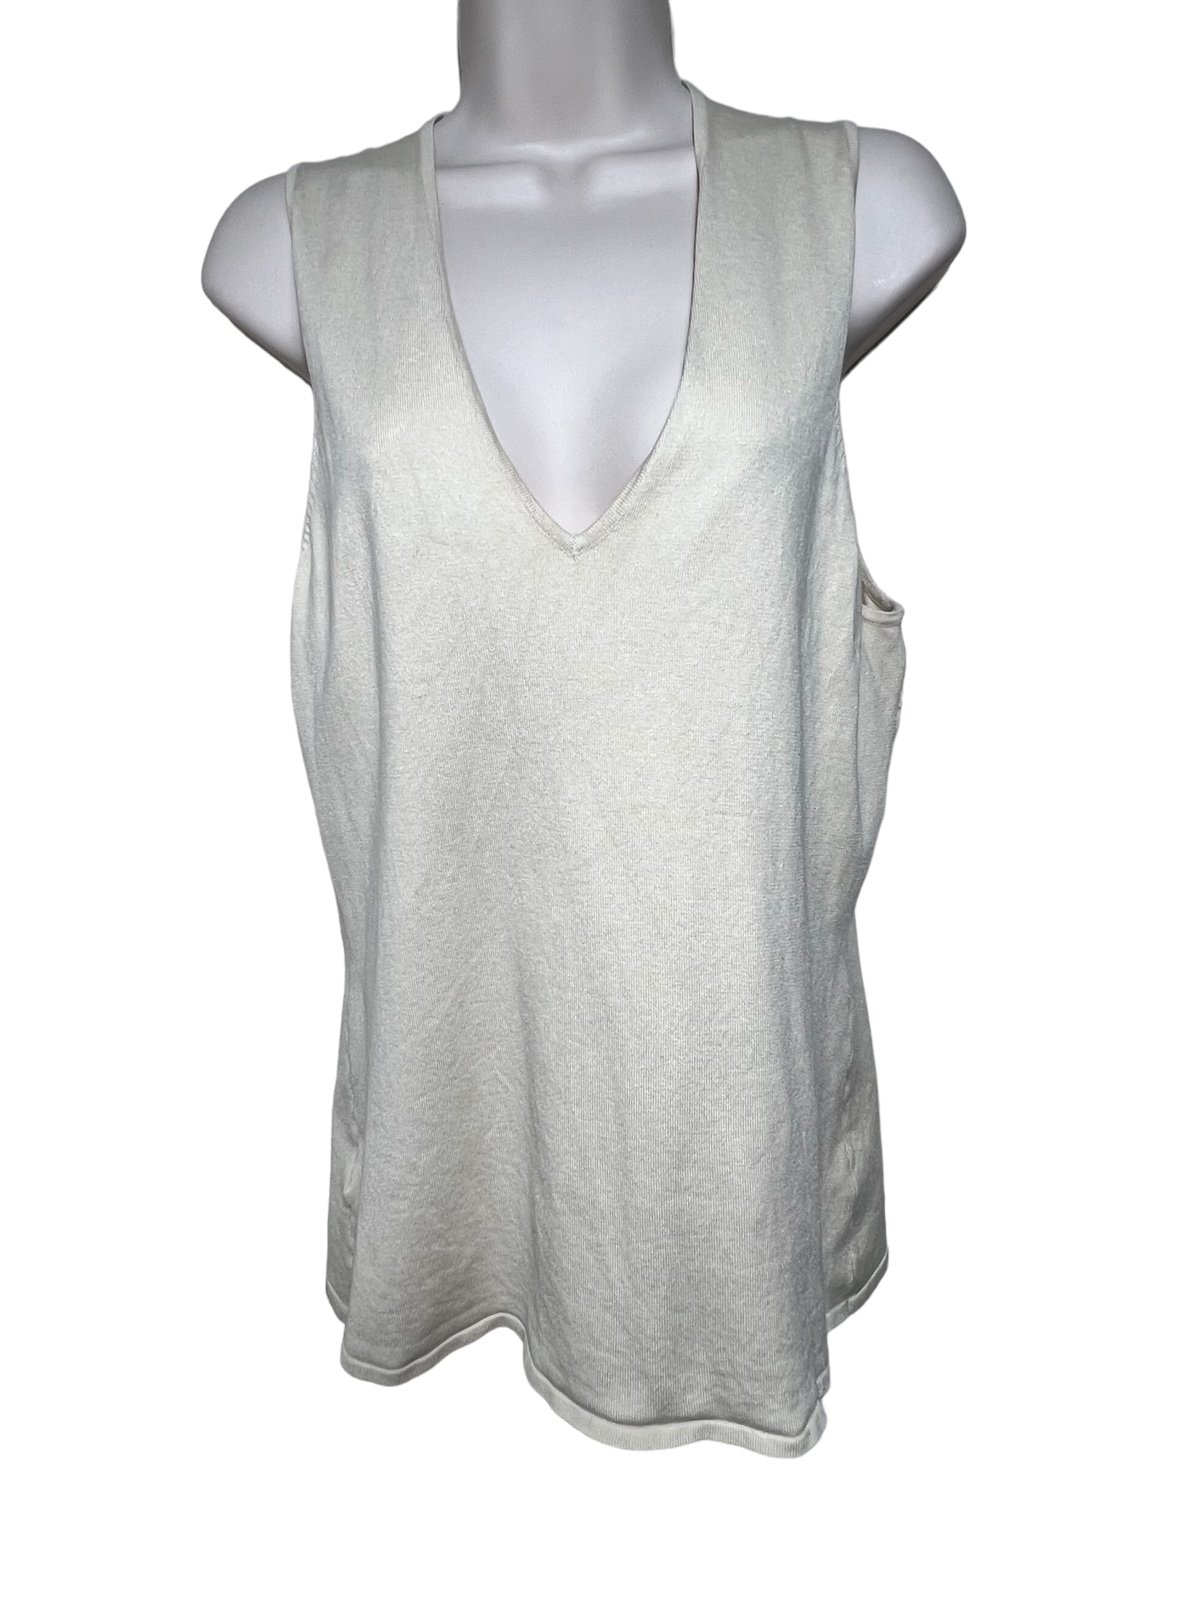 save up to 70% Tommy Bahama  Silk Blend Women´s Size Large Tank Top Linen Color lmusJZifB Great